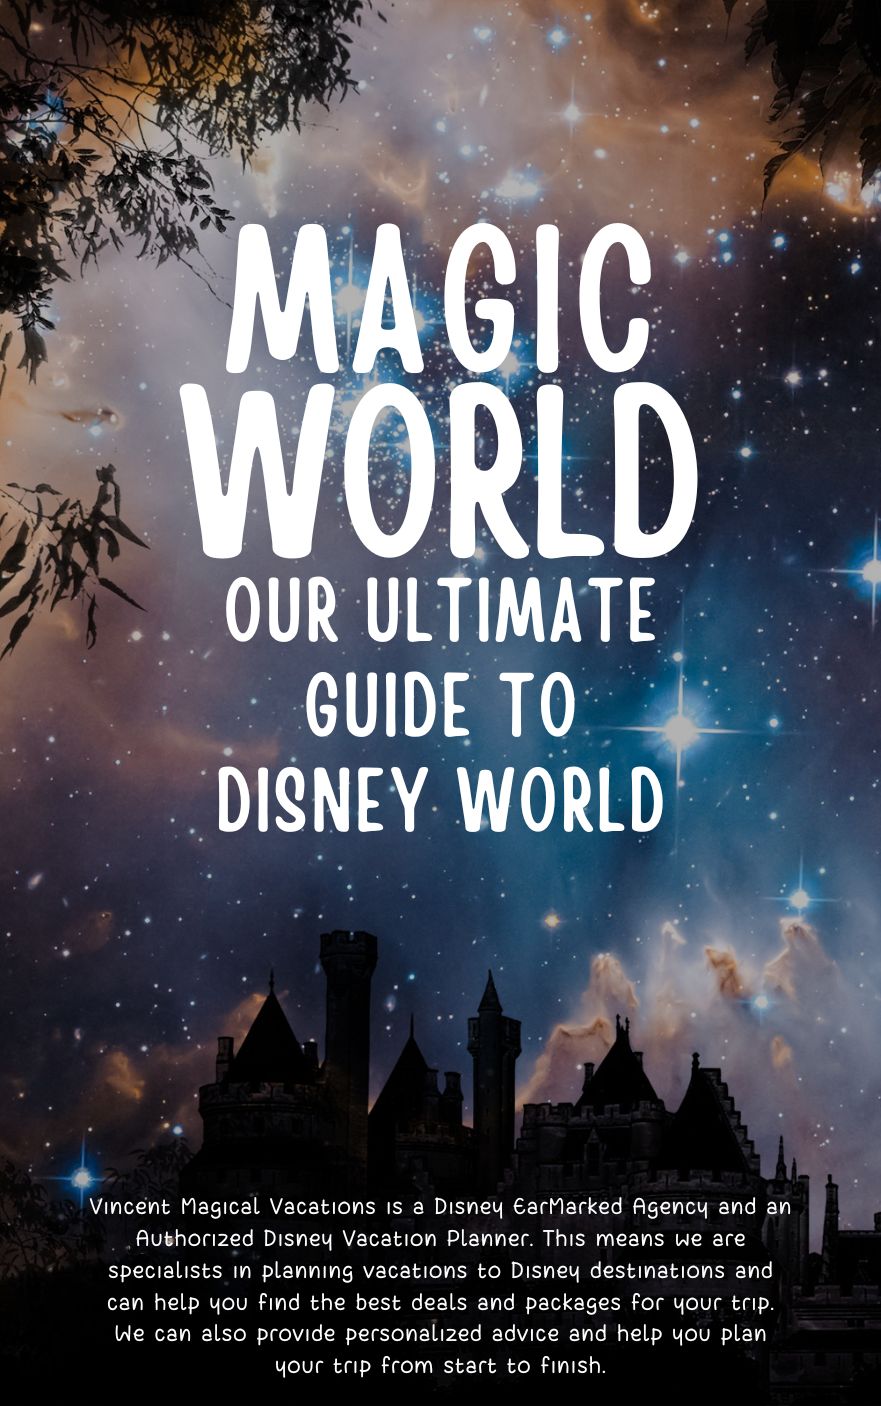 Get your <span style='color:#4e63d7;font-size:23px;'><b>FREE</b></span> ULTIMATE Disney World Guide Our FREE Guide